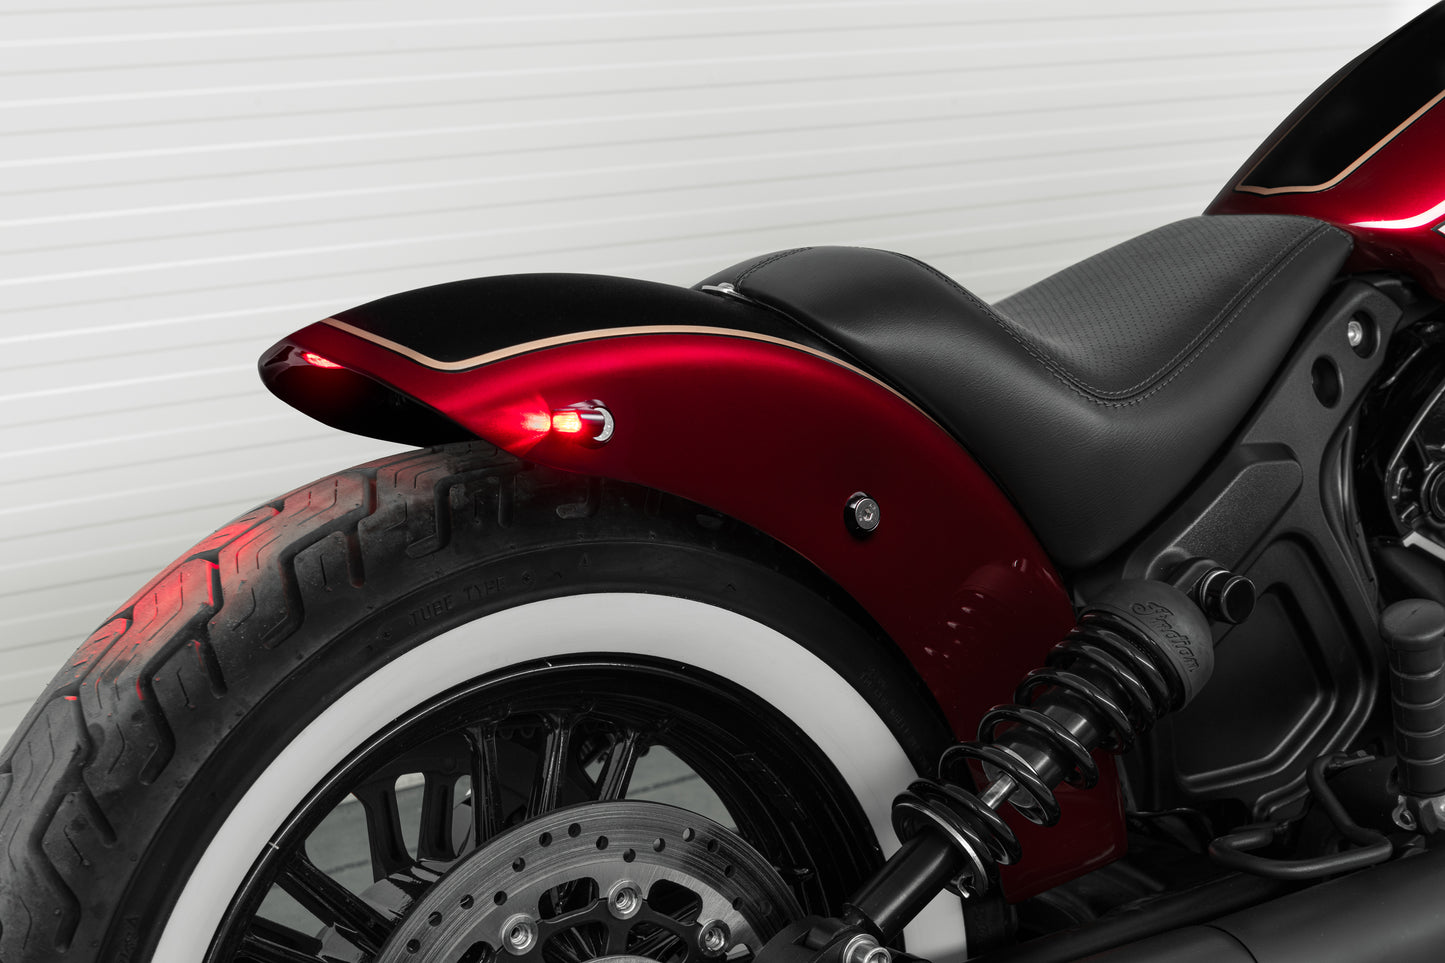 Harley Davidson motorcycle with Killer Custom "Mohawk" led rear taillight/turn signal combo from the side white background